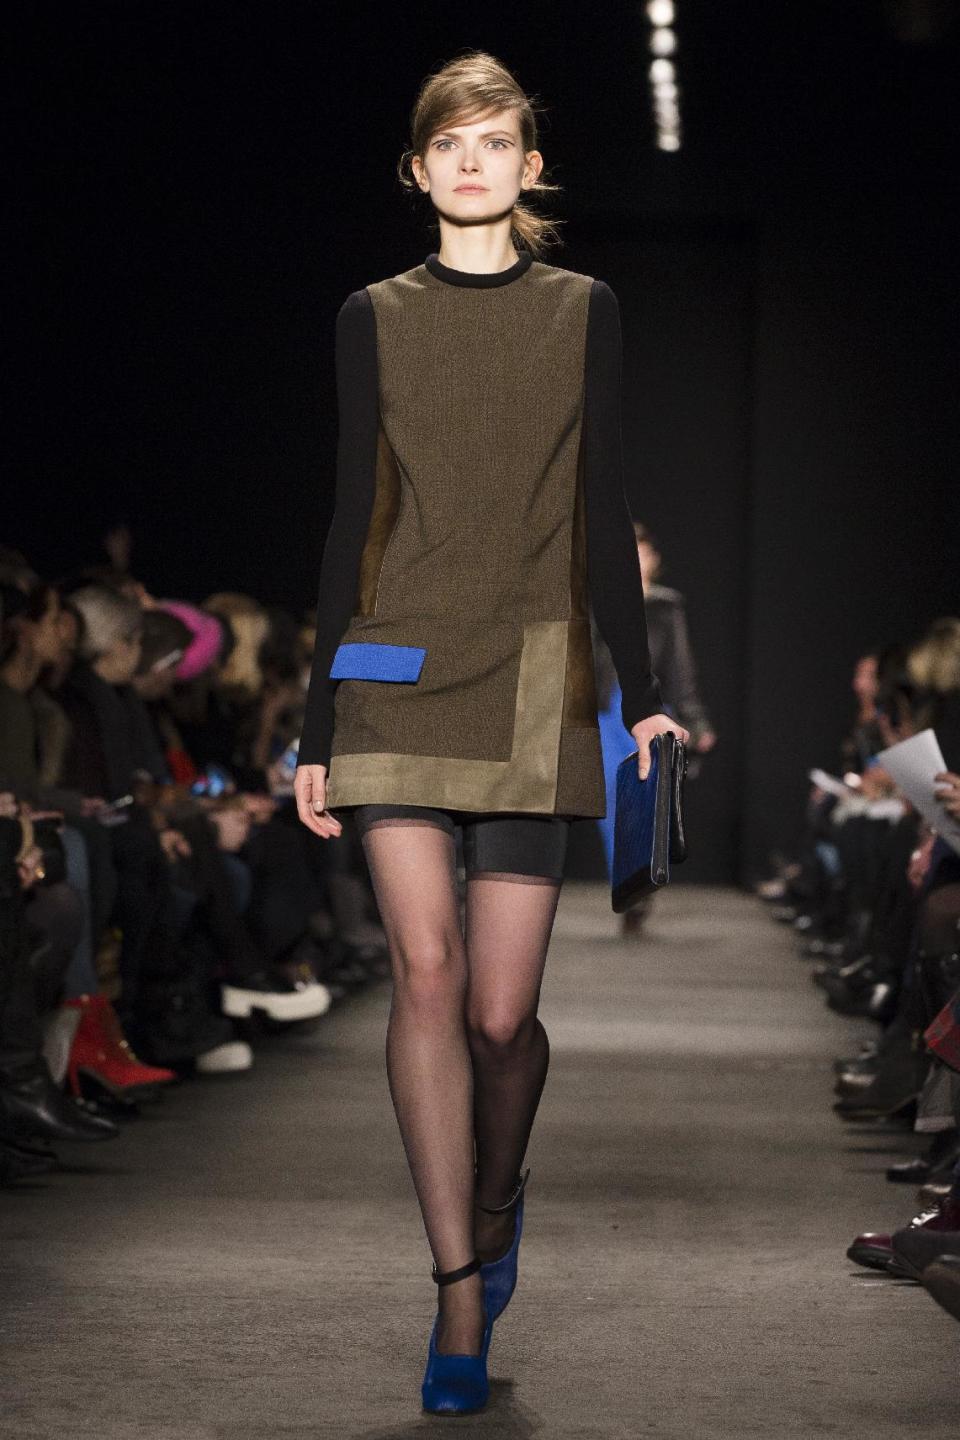 A model walks the runway at the presentation of the Rag & Bone Fall 2013 fashion collection during Fashion Week, Friday, Feb. 8, 2013, in New York. (AP Photo/John Minchillo)